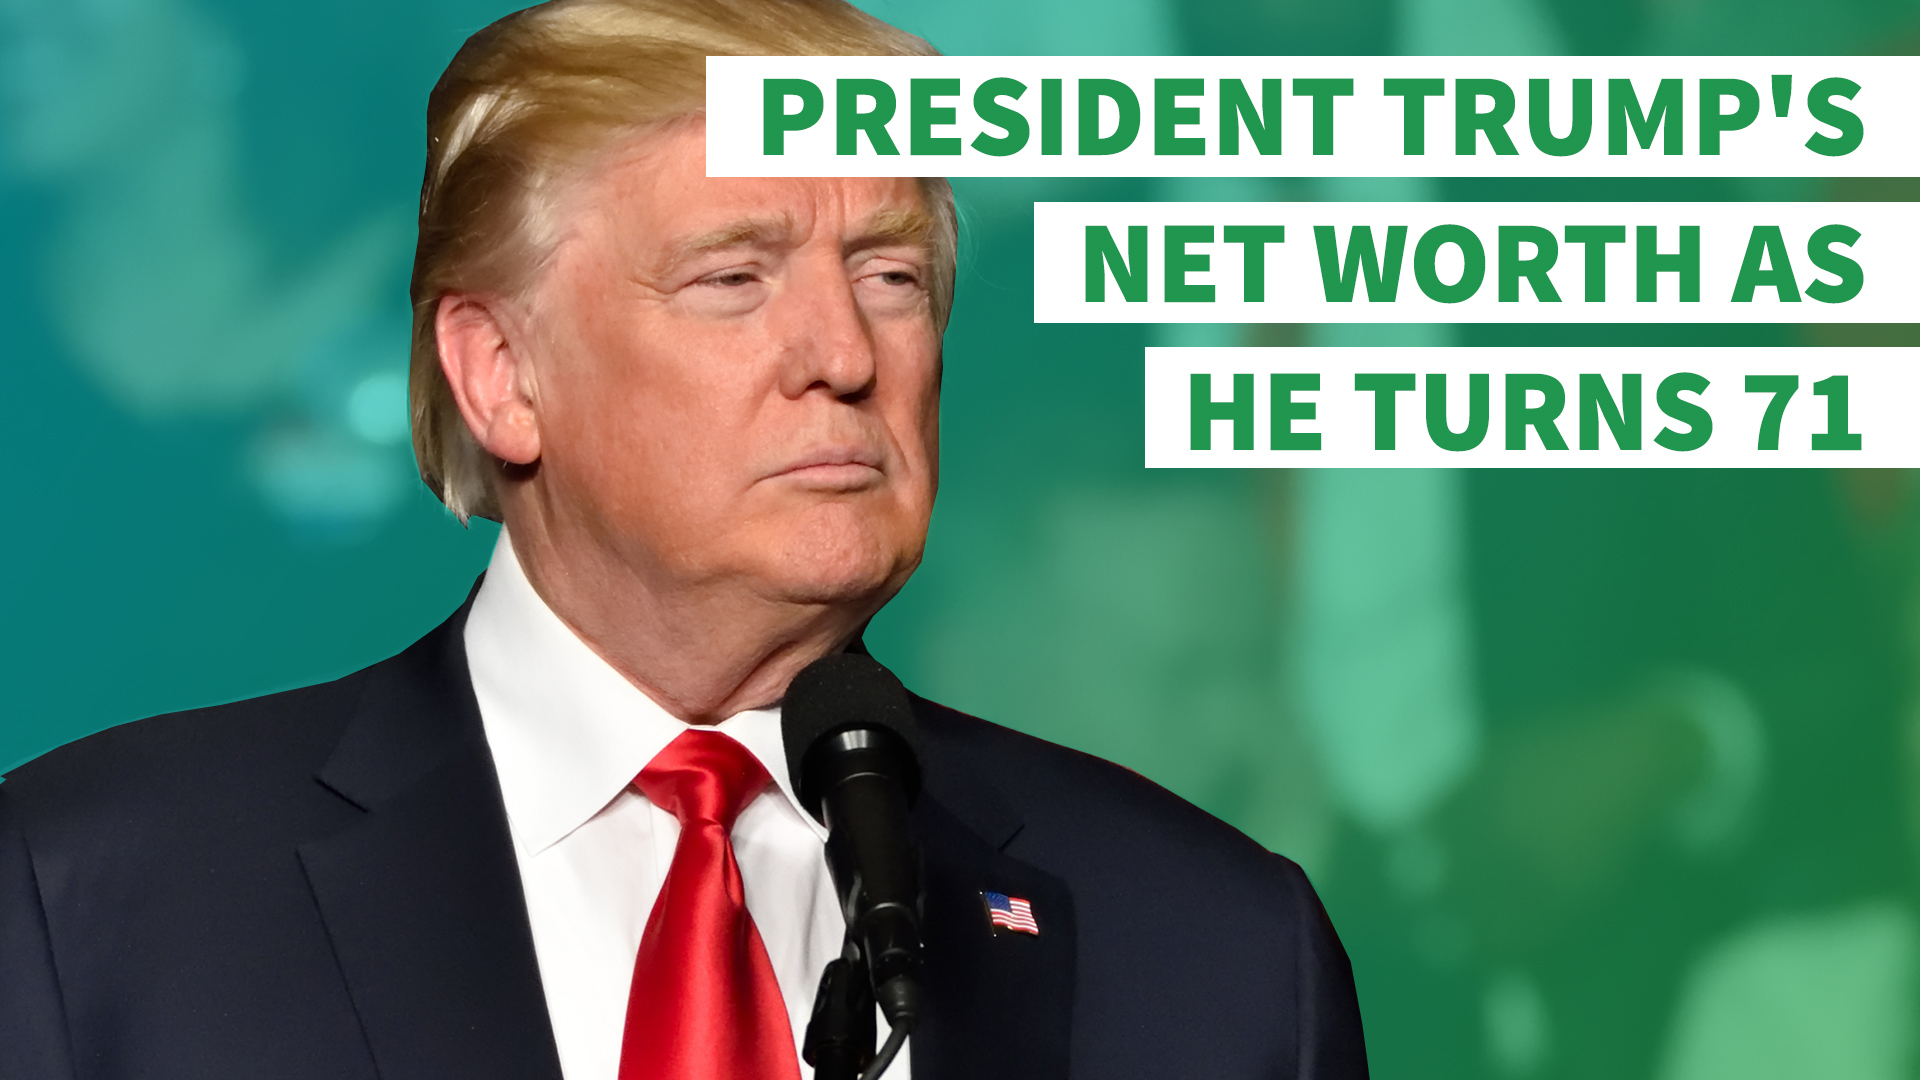 What is Donald Trump's net worth?